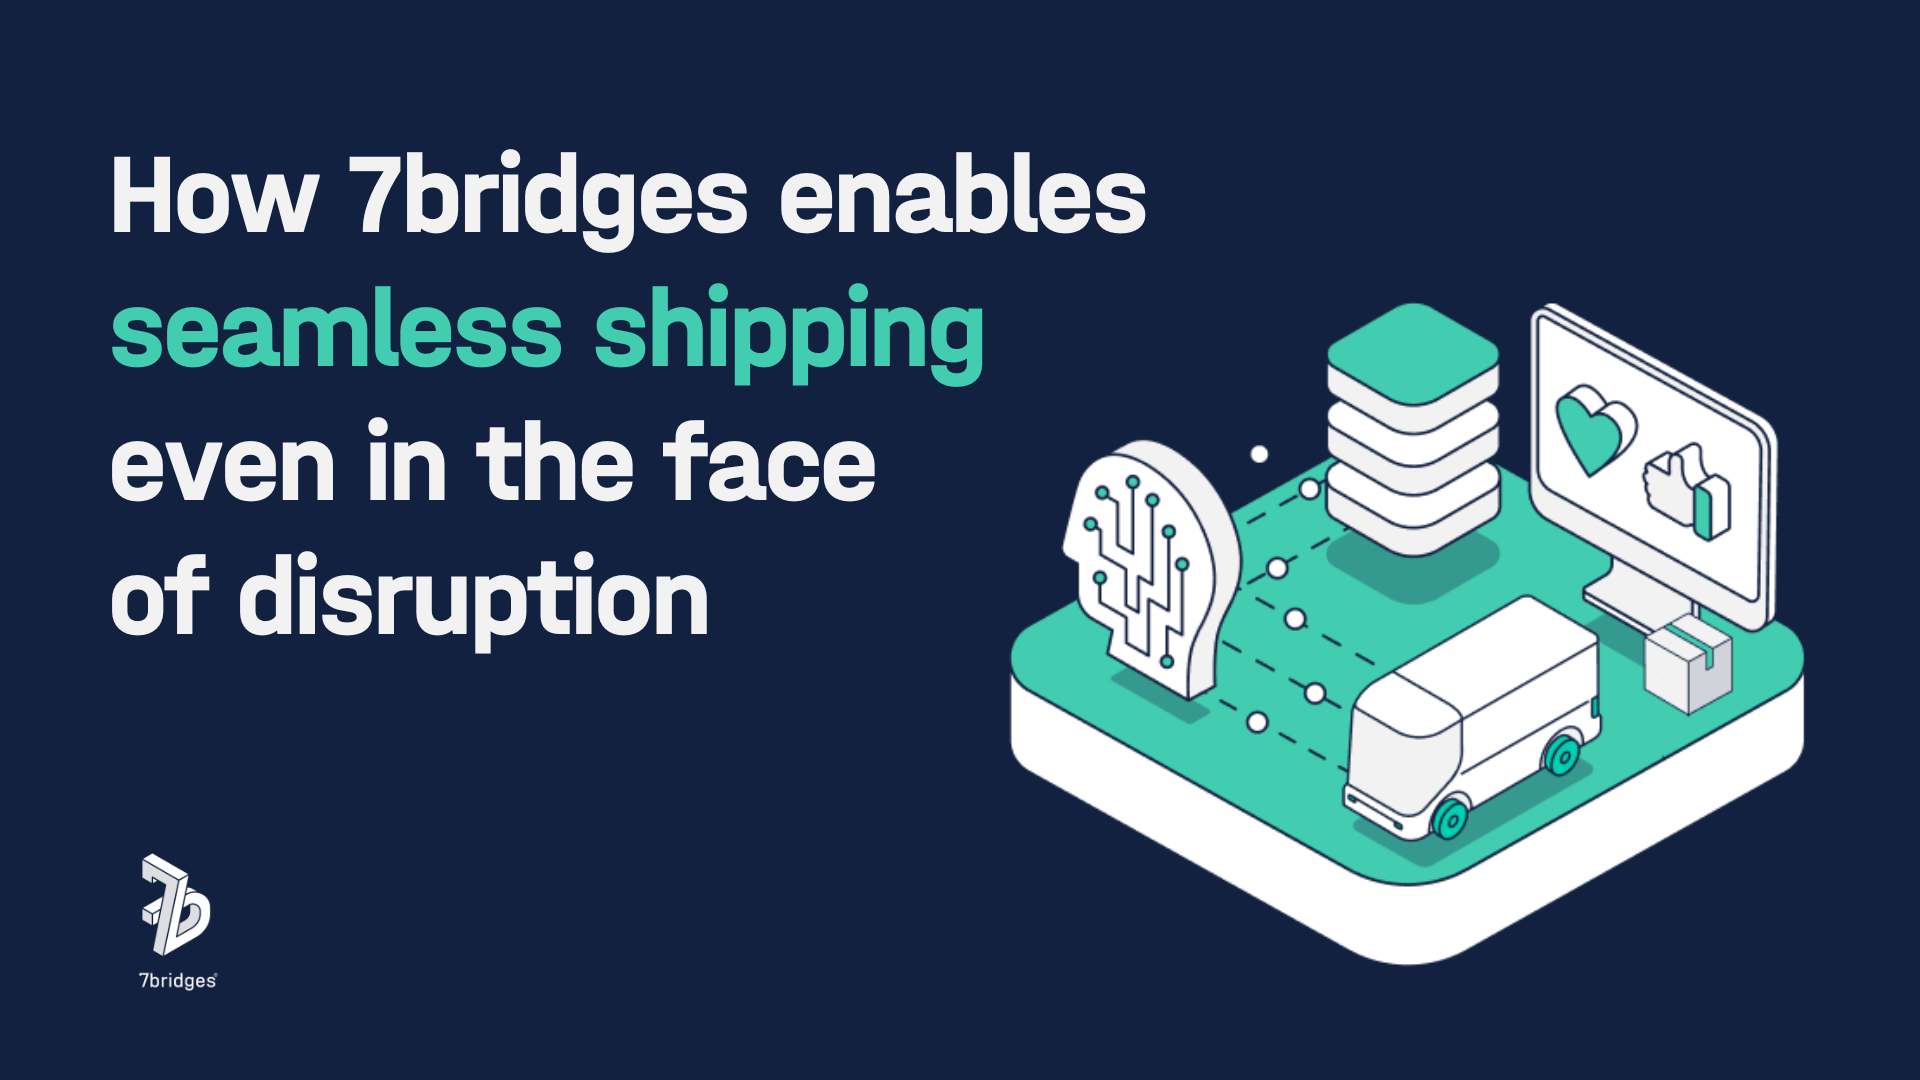 How 7bridges enables seamless shipping even in the face of disruption